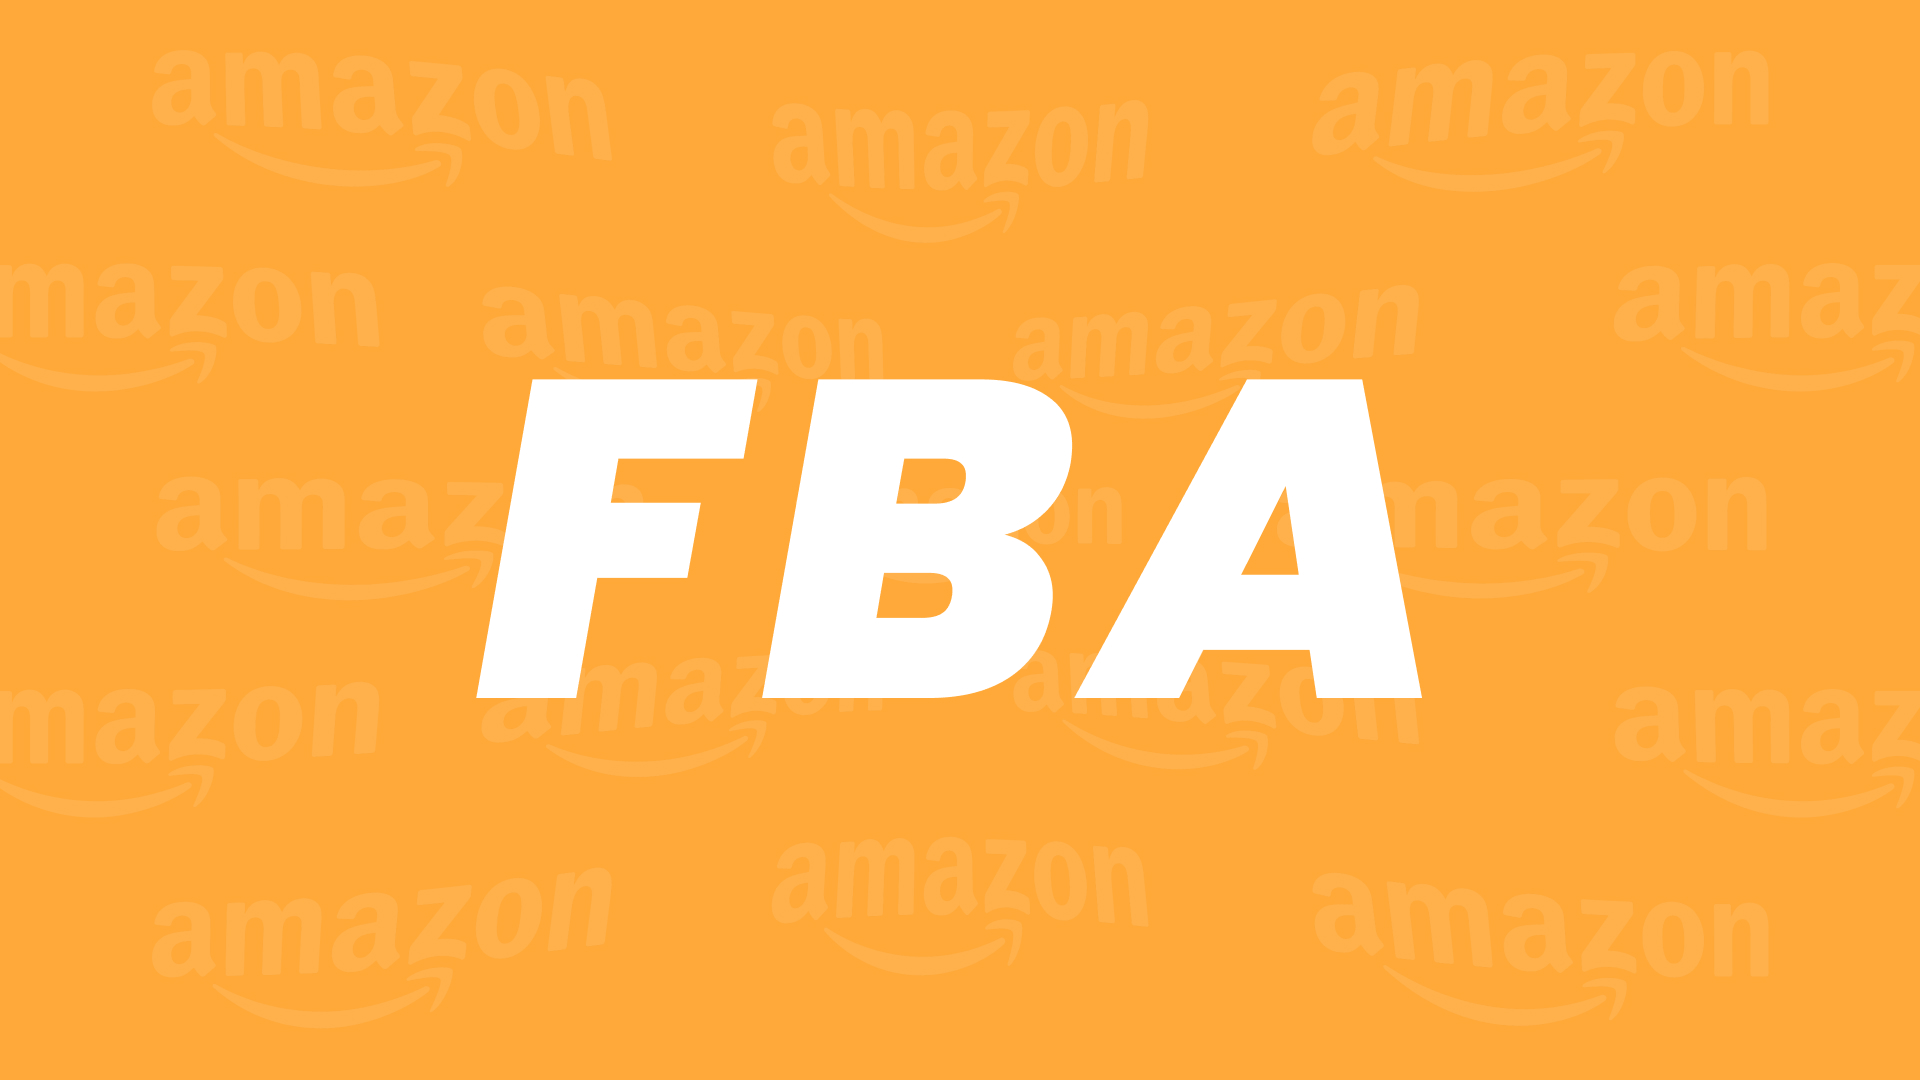 What to Sell on Amazon FBA in 2022